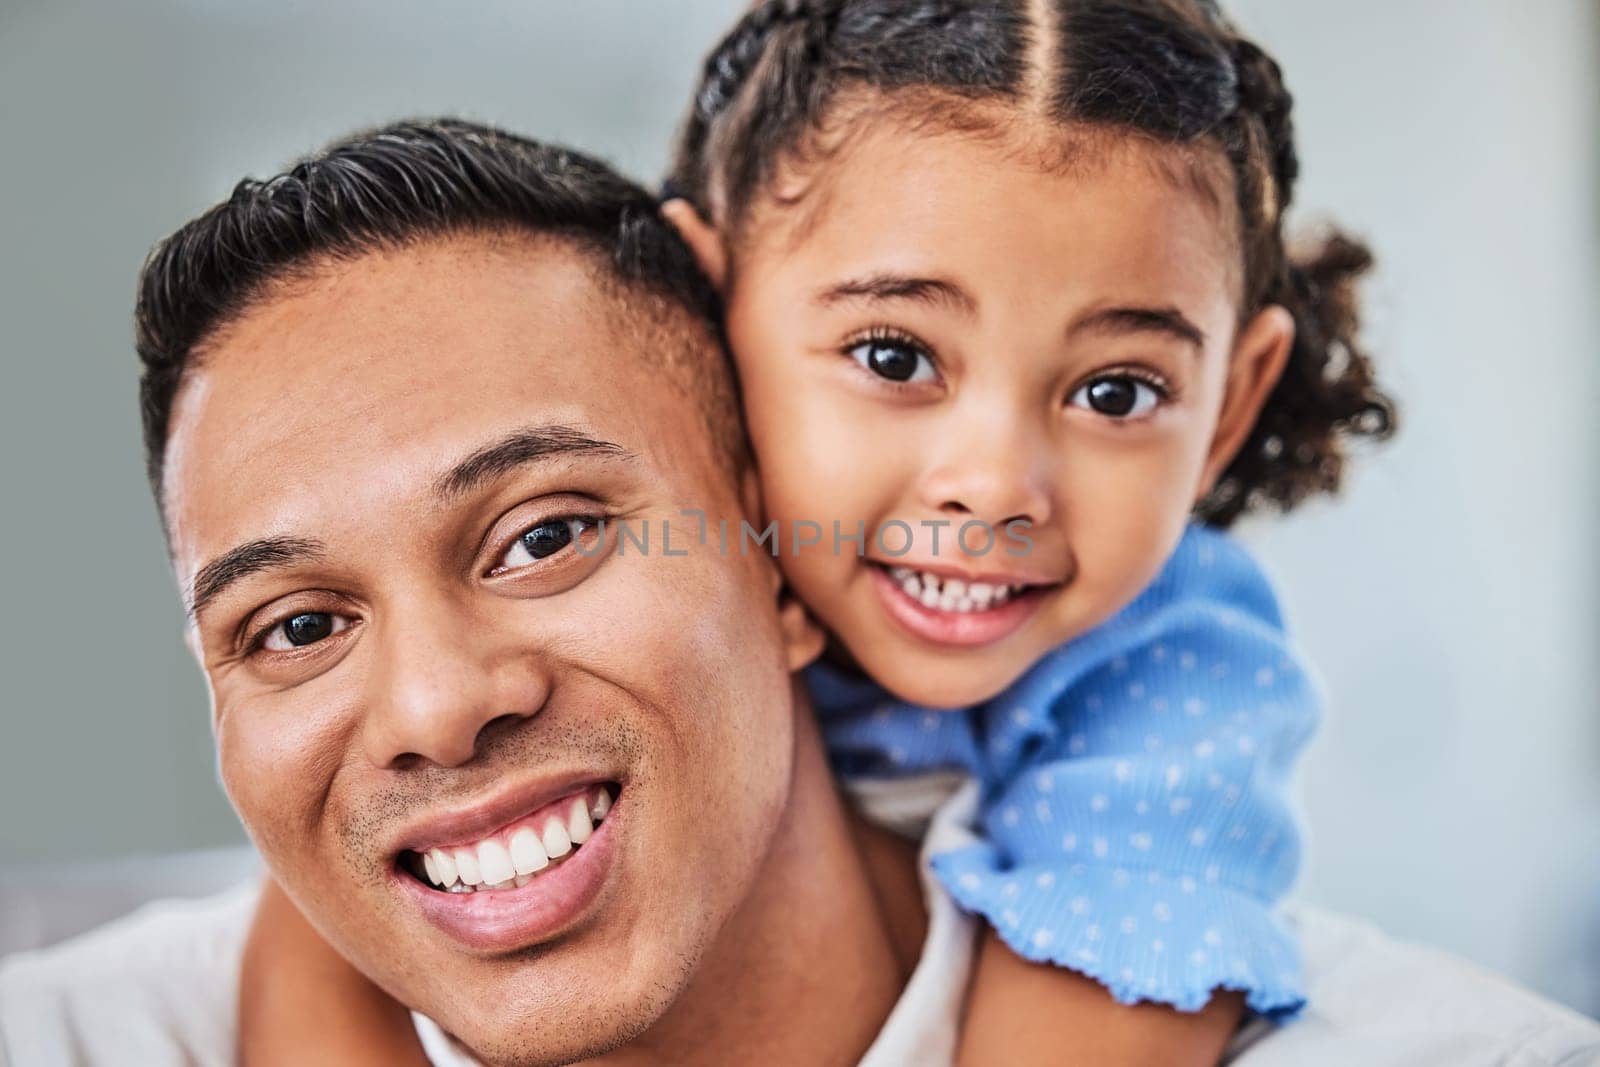 Family, girl and father in portrait with child having fun, hugging and bonding with dad at home on a weekend. Smile, Guadalajara and man smiling with a young kid or baby enjoys quality time in Mexico.